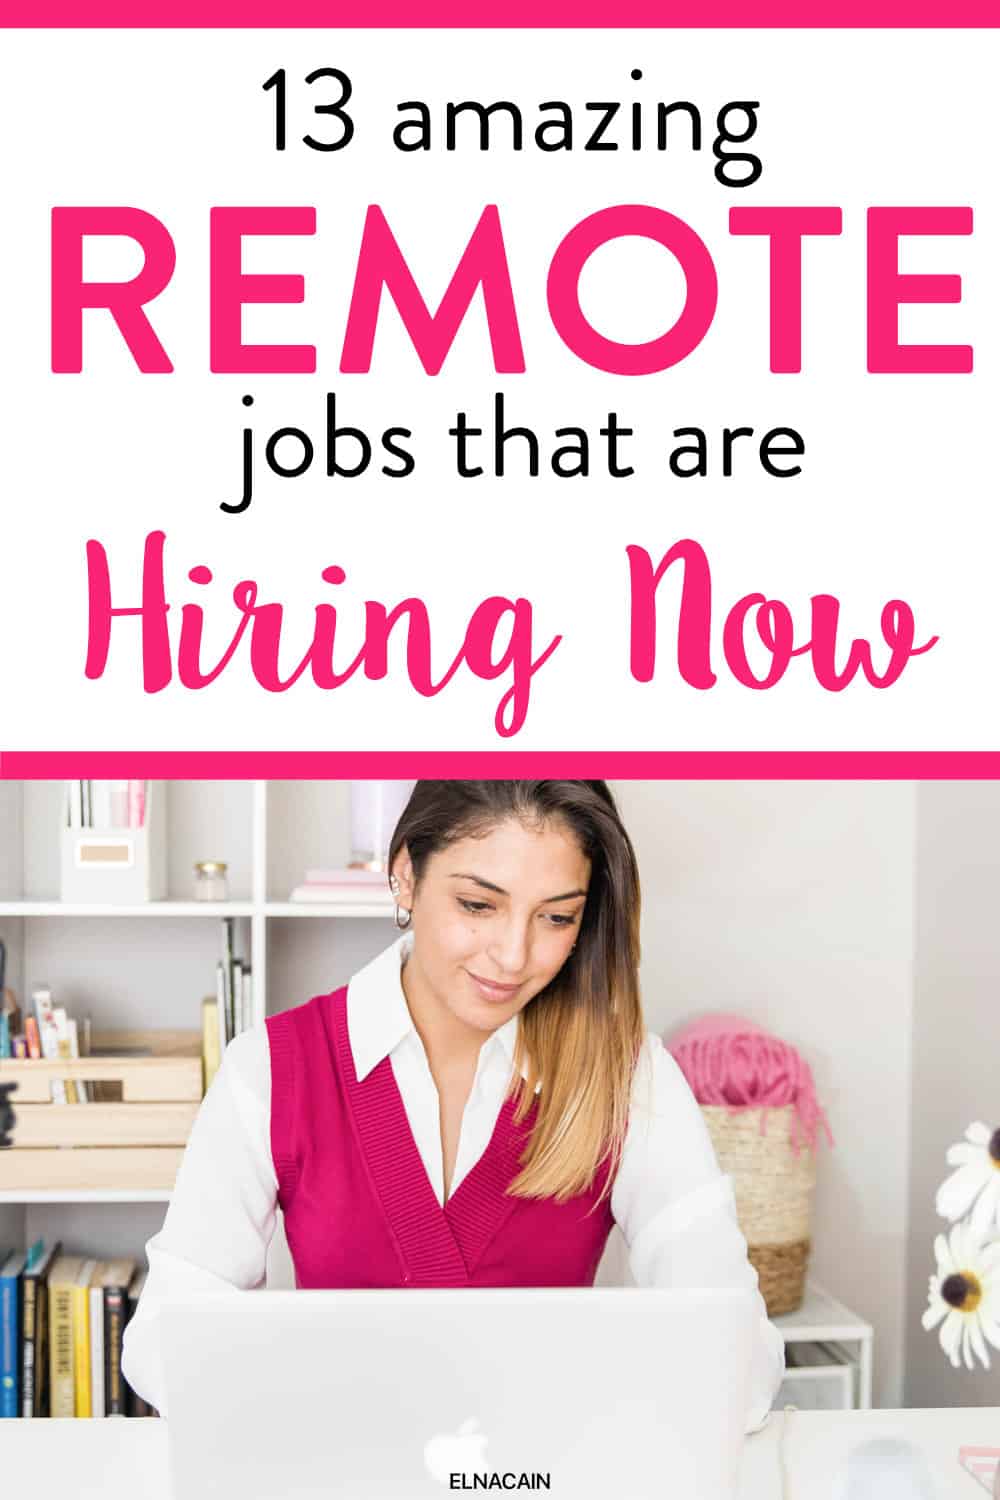 work remotely jobs indeed